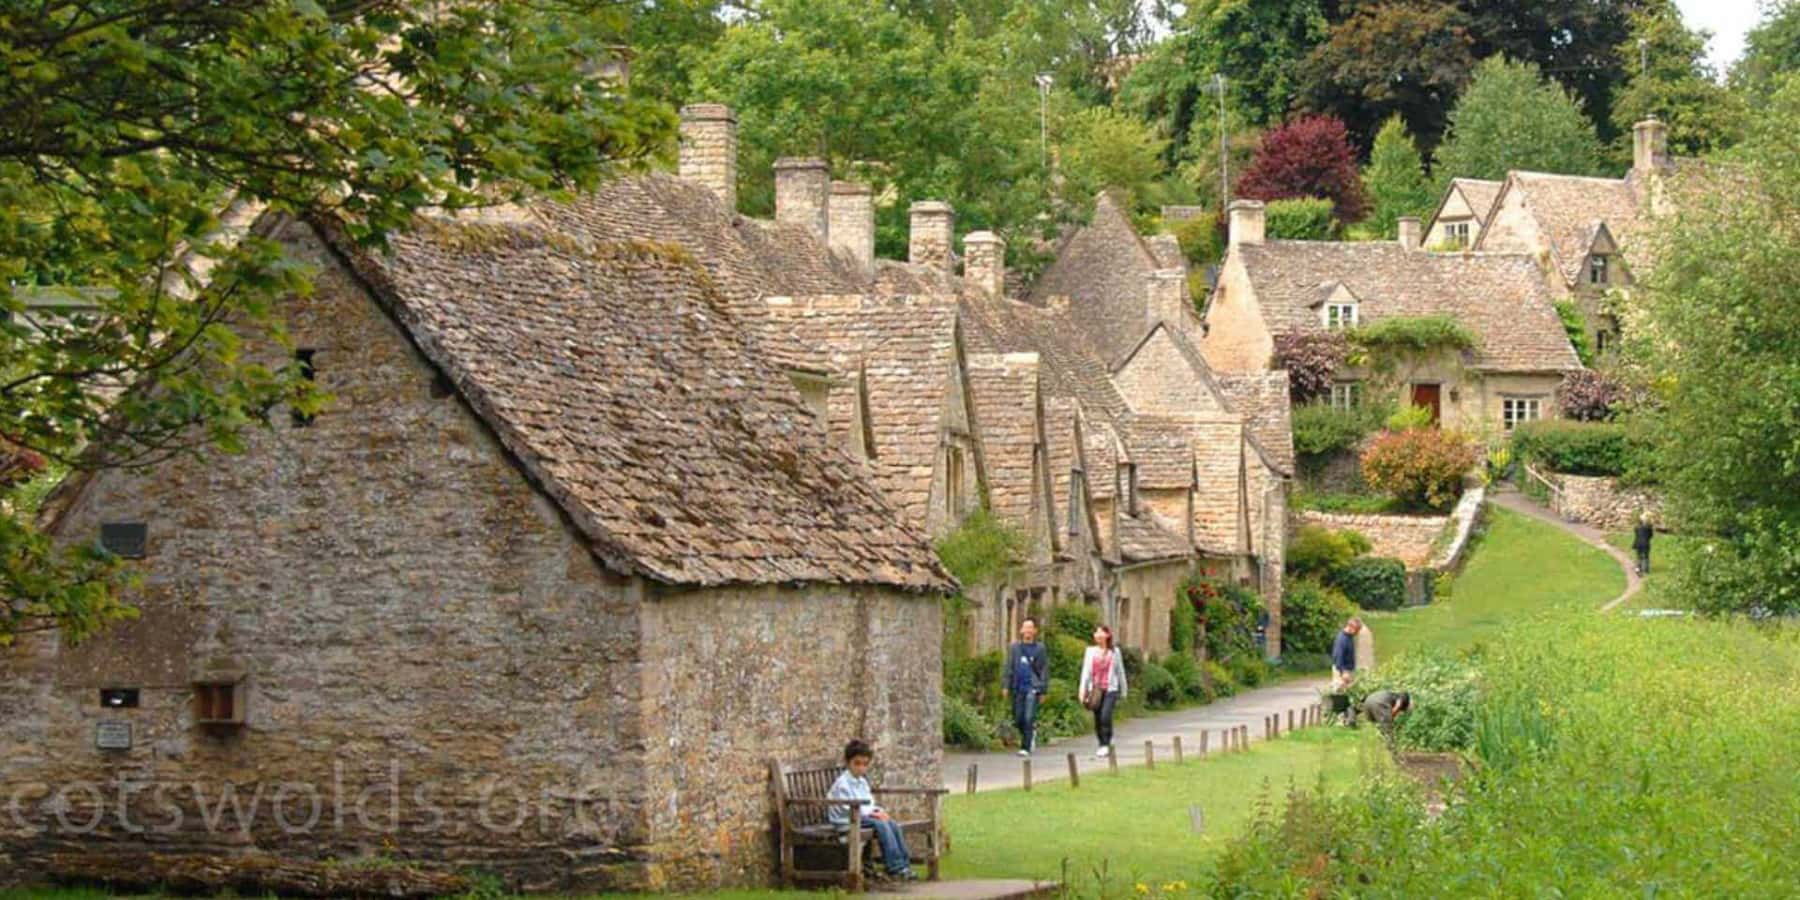 Fall in love with the Cotswolds